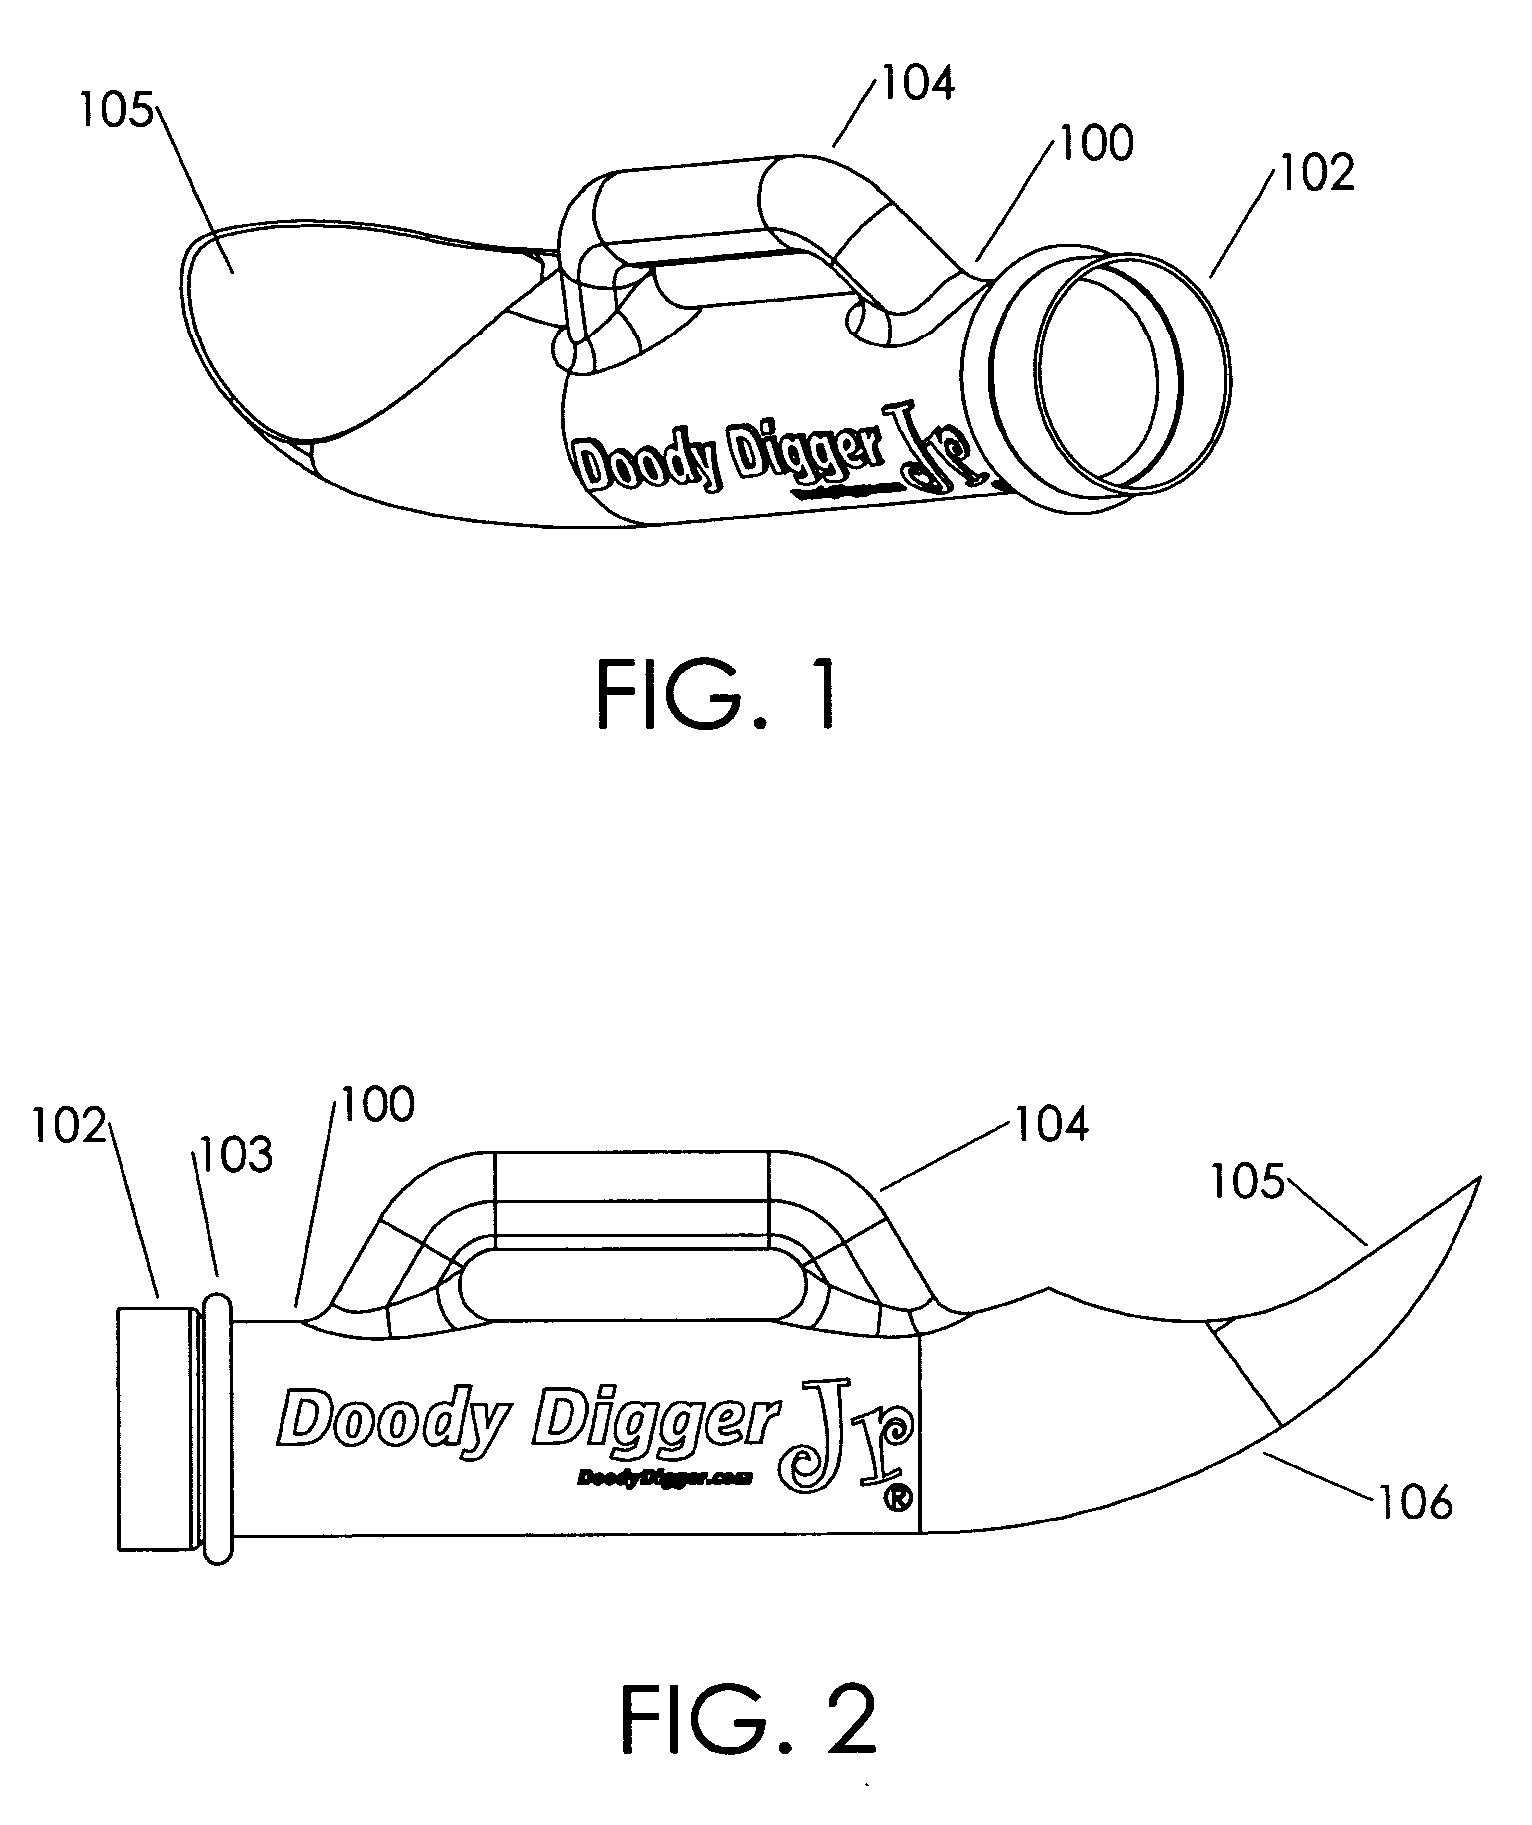 Device for the collection and disposal of animal waste